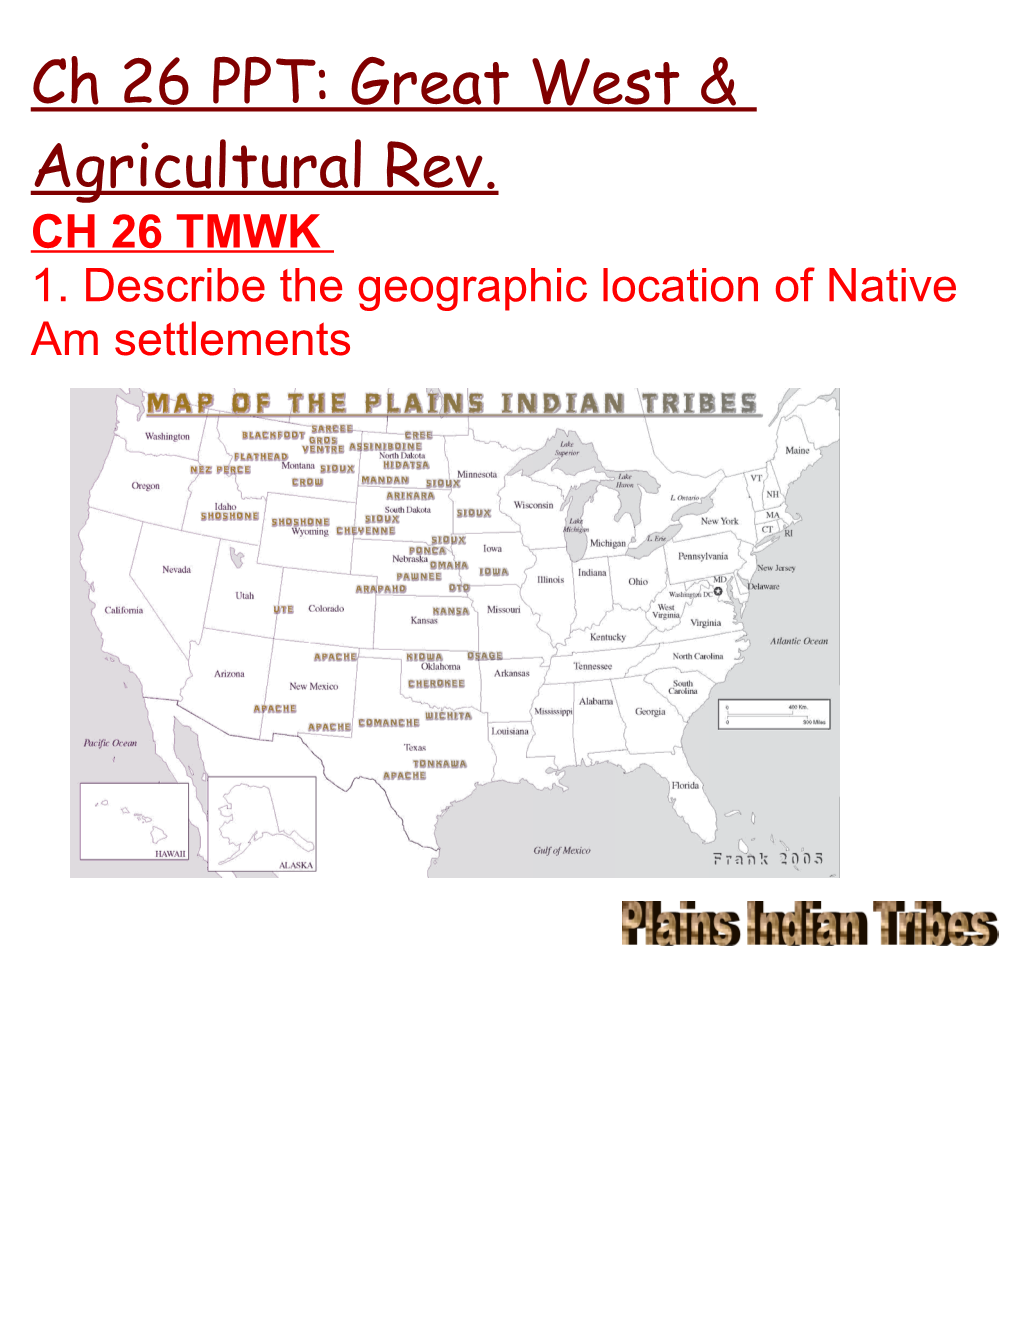 Ch 26 PPT: Great West & Agricultural Rev